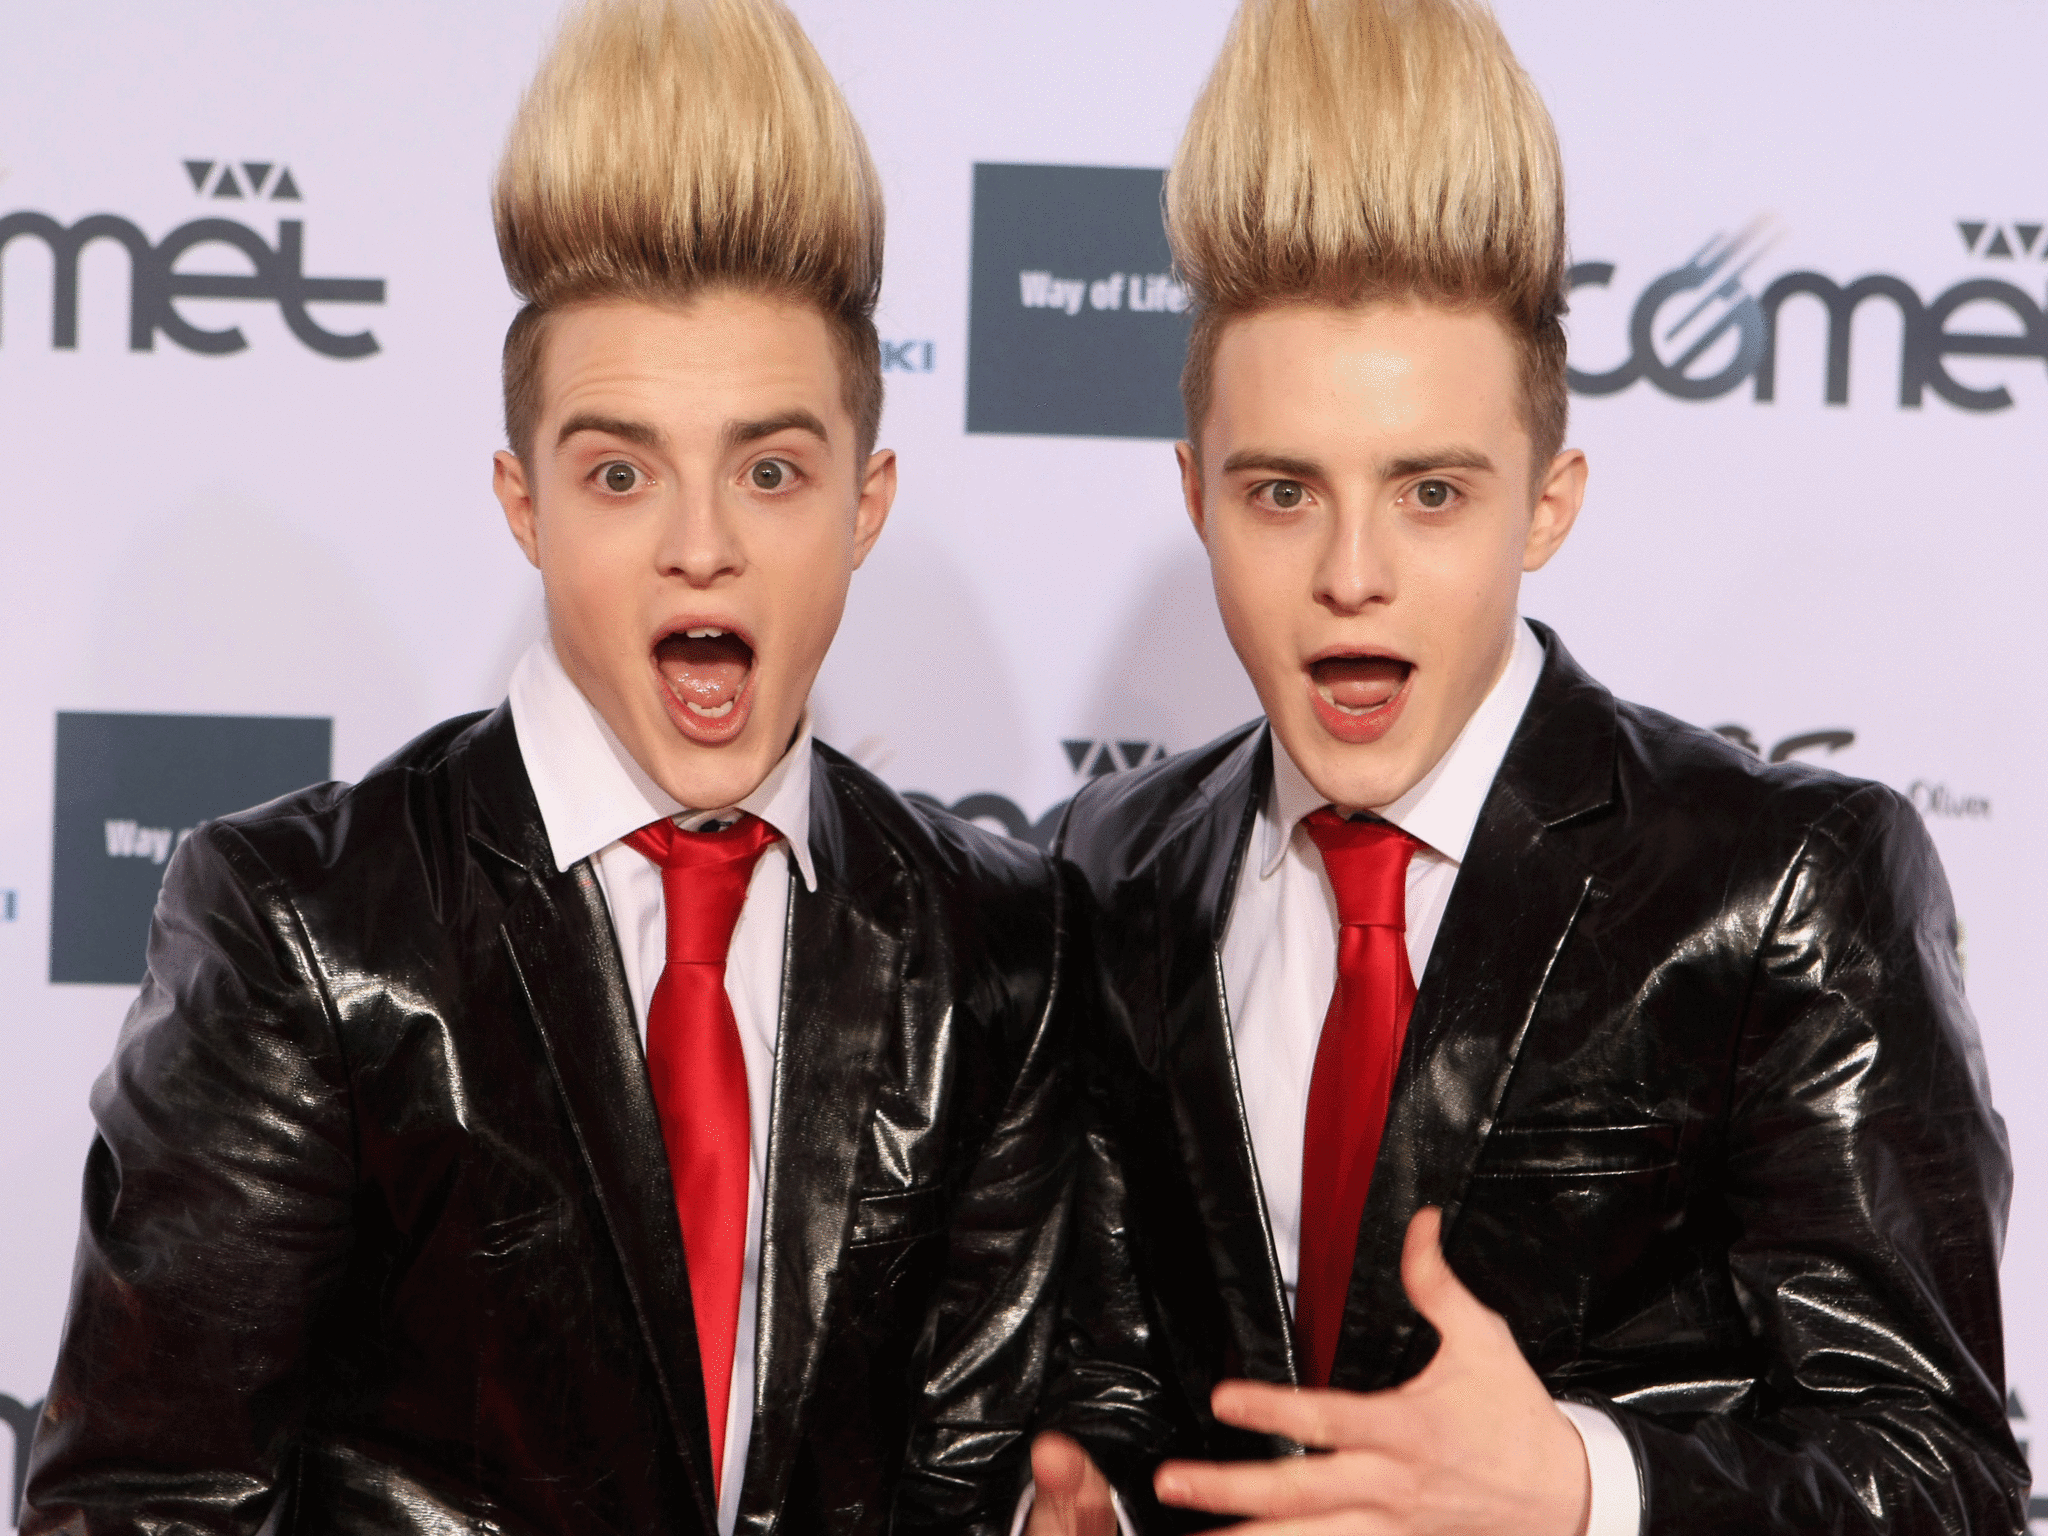 Jedward lookalike stole sex toy and hairspray 'to look good'